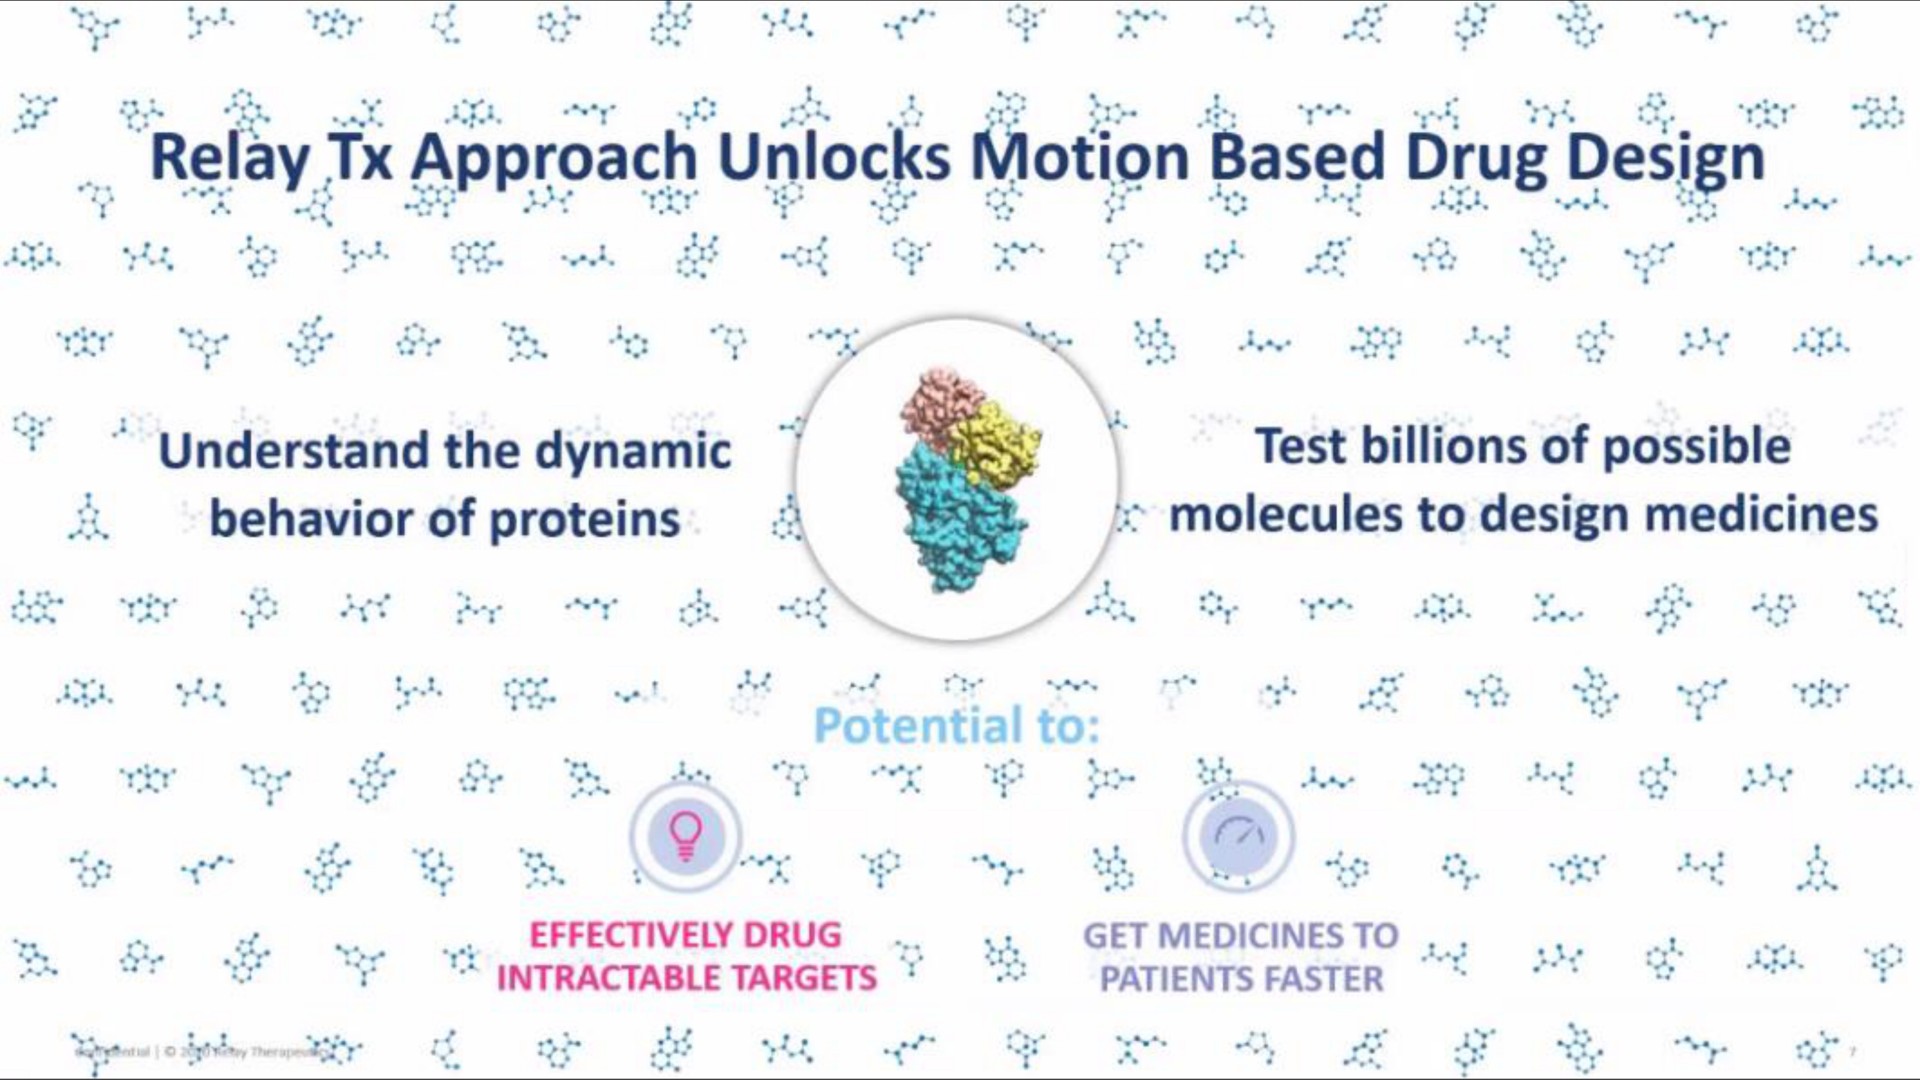 relay approach unlocks motion based drug design understand the dynamic behavior of proteins test billions of possible molecules to design medicines intractable targets patients faster | Relay Therapeutics